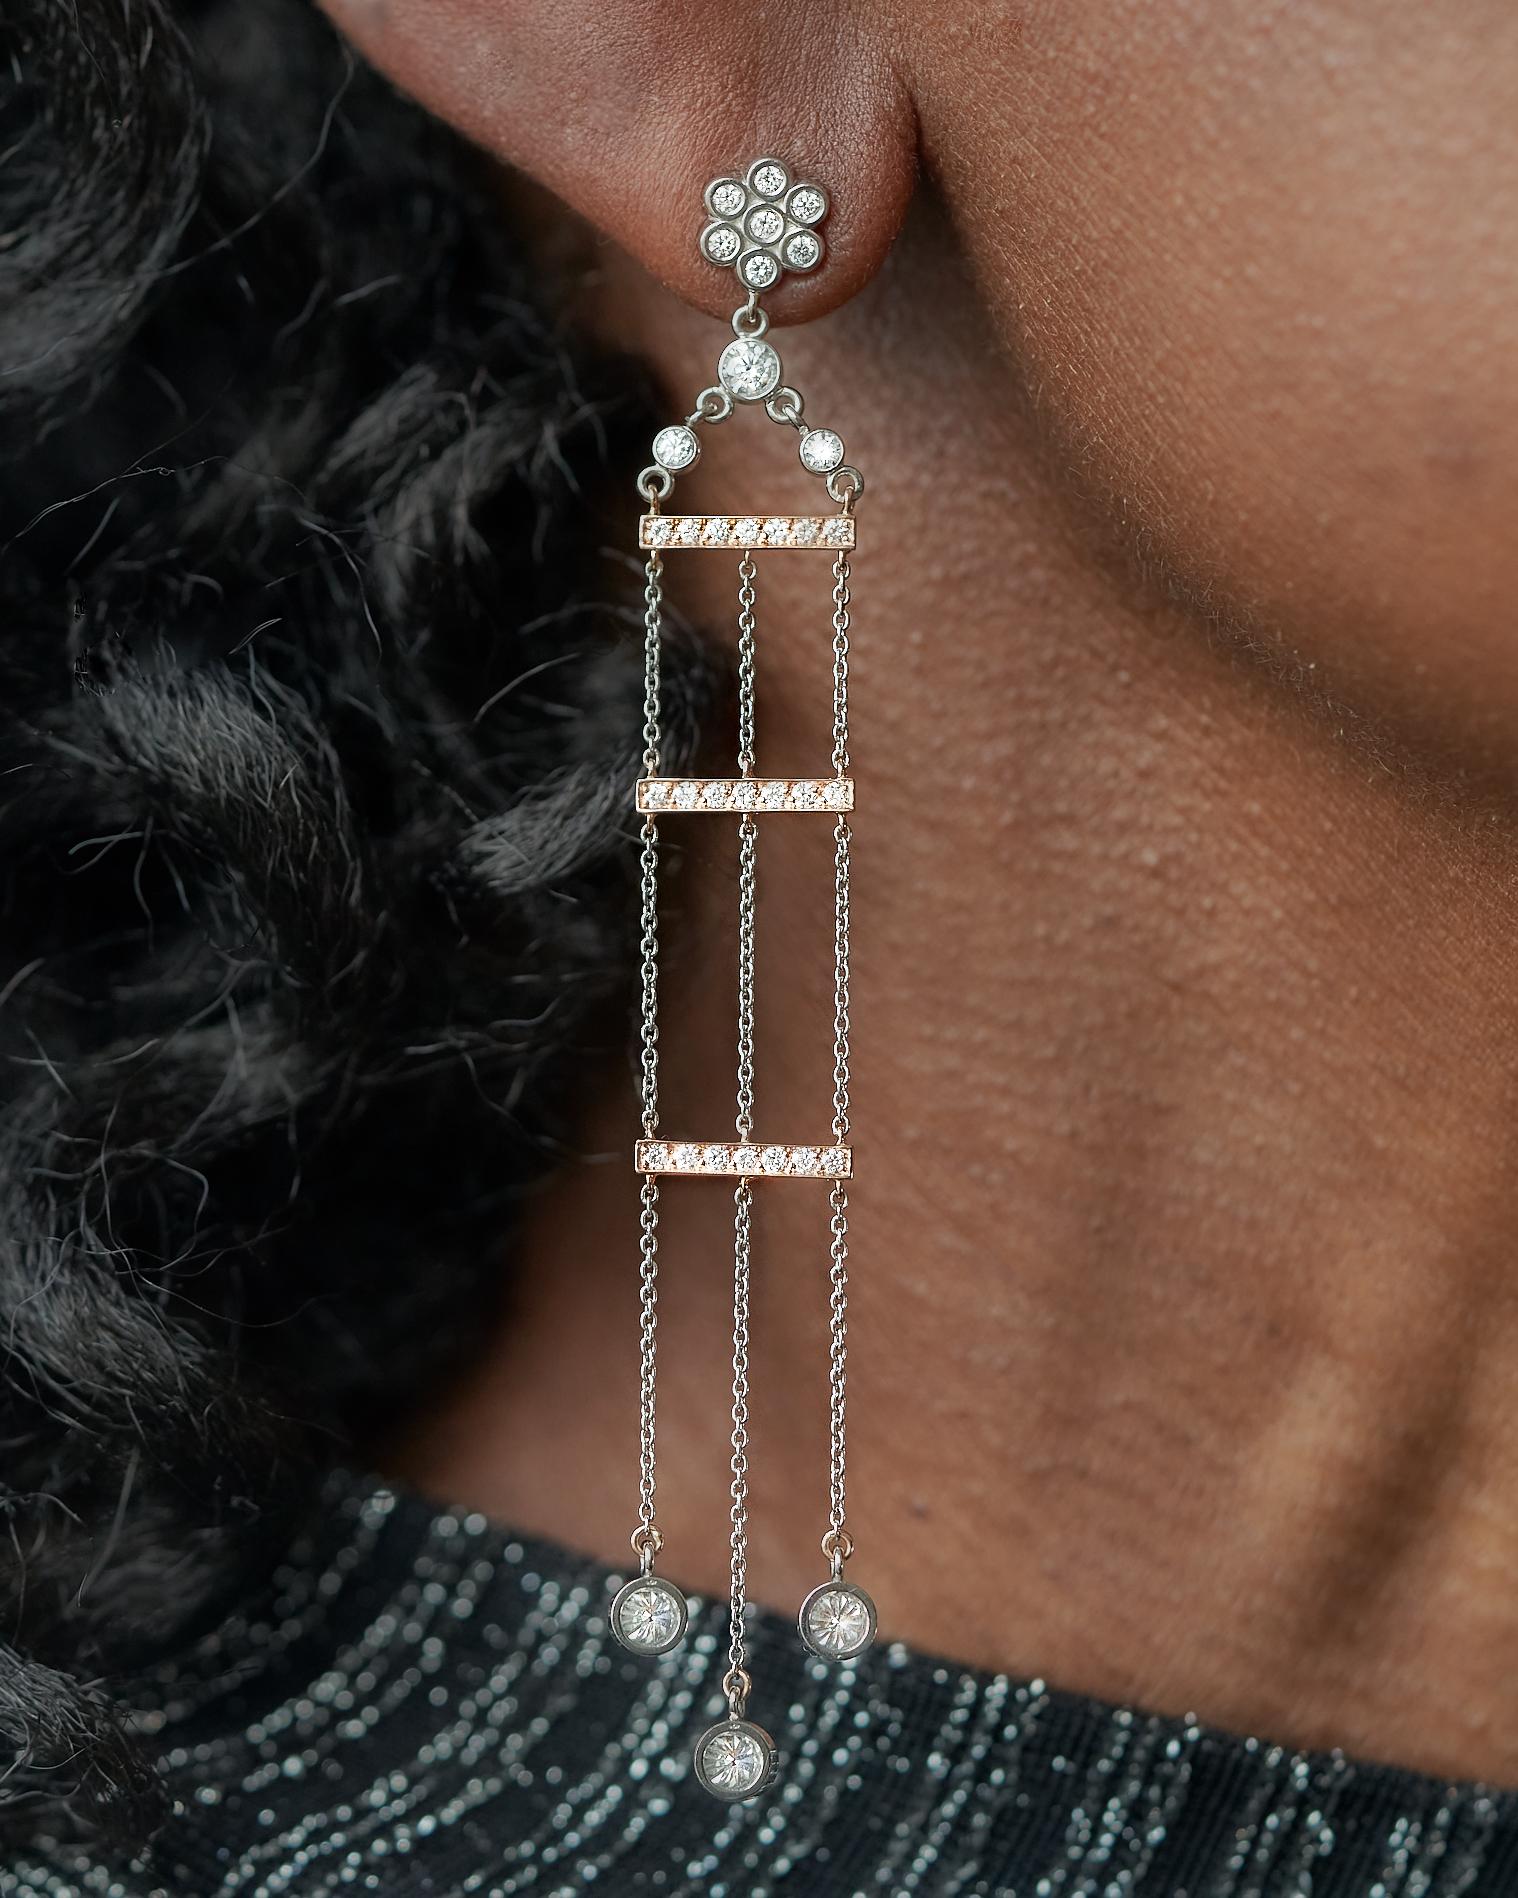 Contemporary Wendy Brandes Diamond Chandelier Earrings in Platinum and 18K Rose Gold For Sale